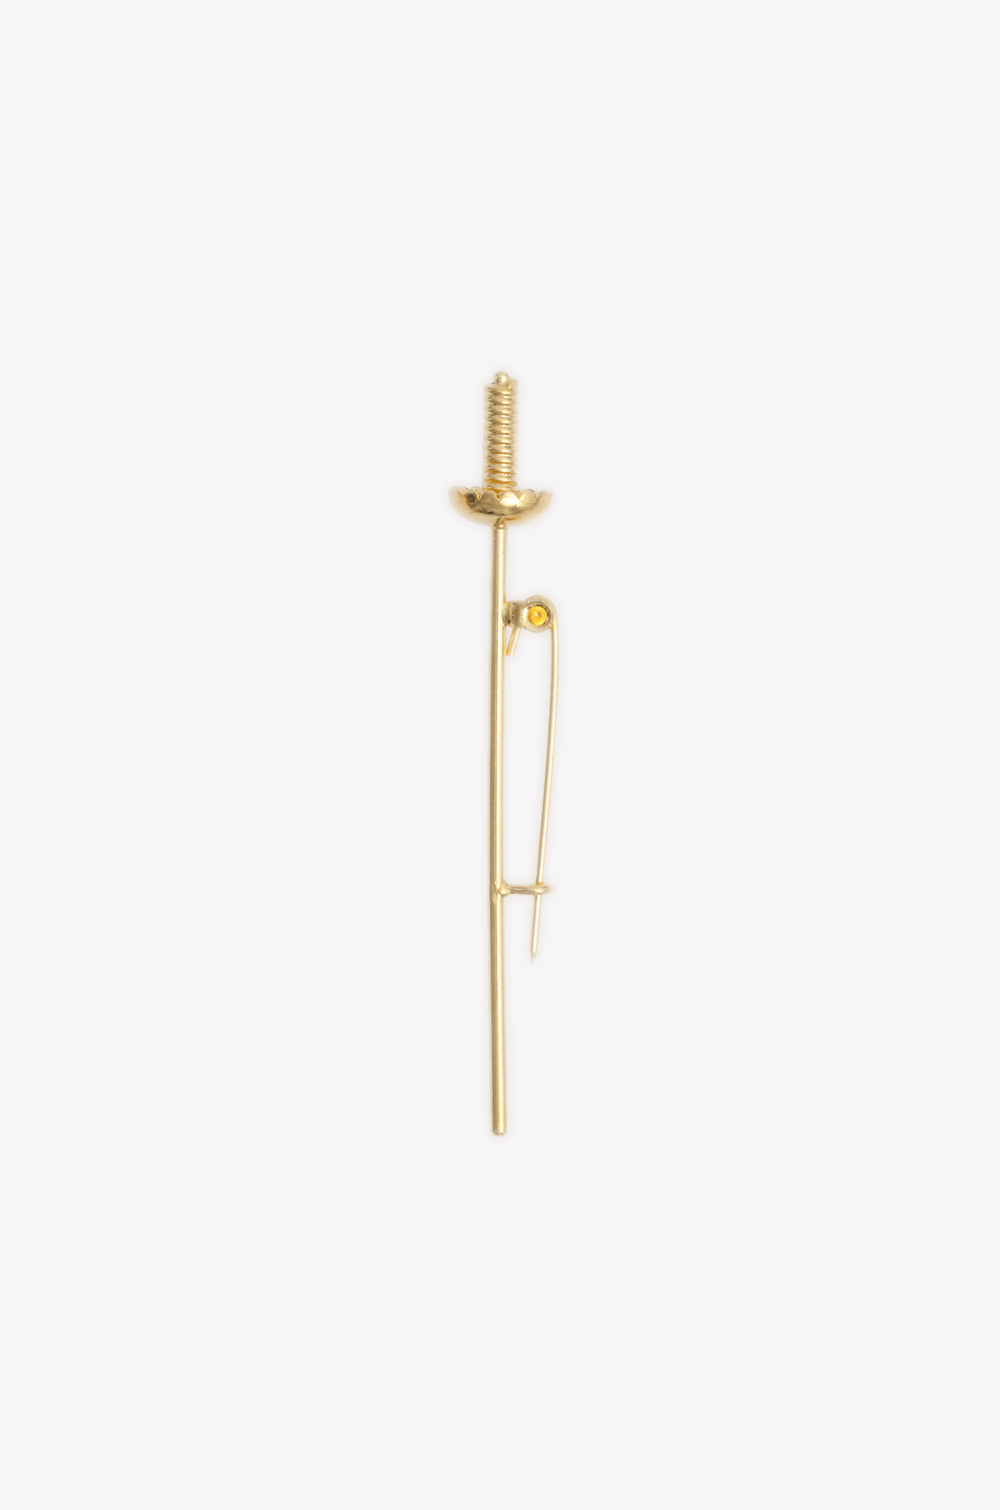 Pin gold-plated Epee